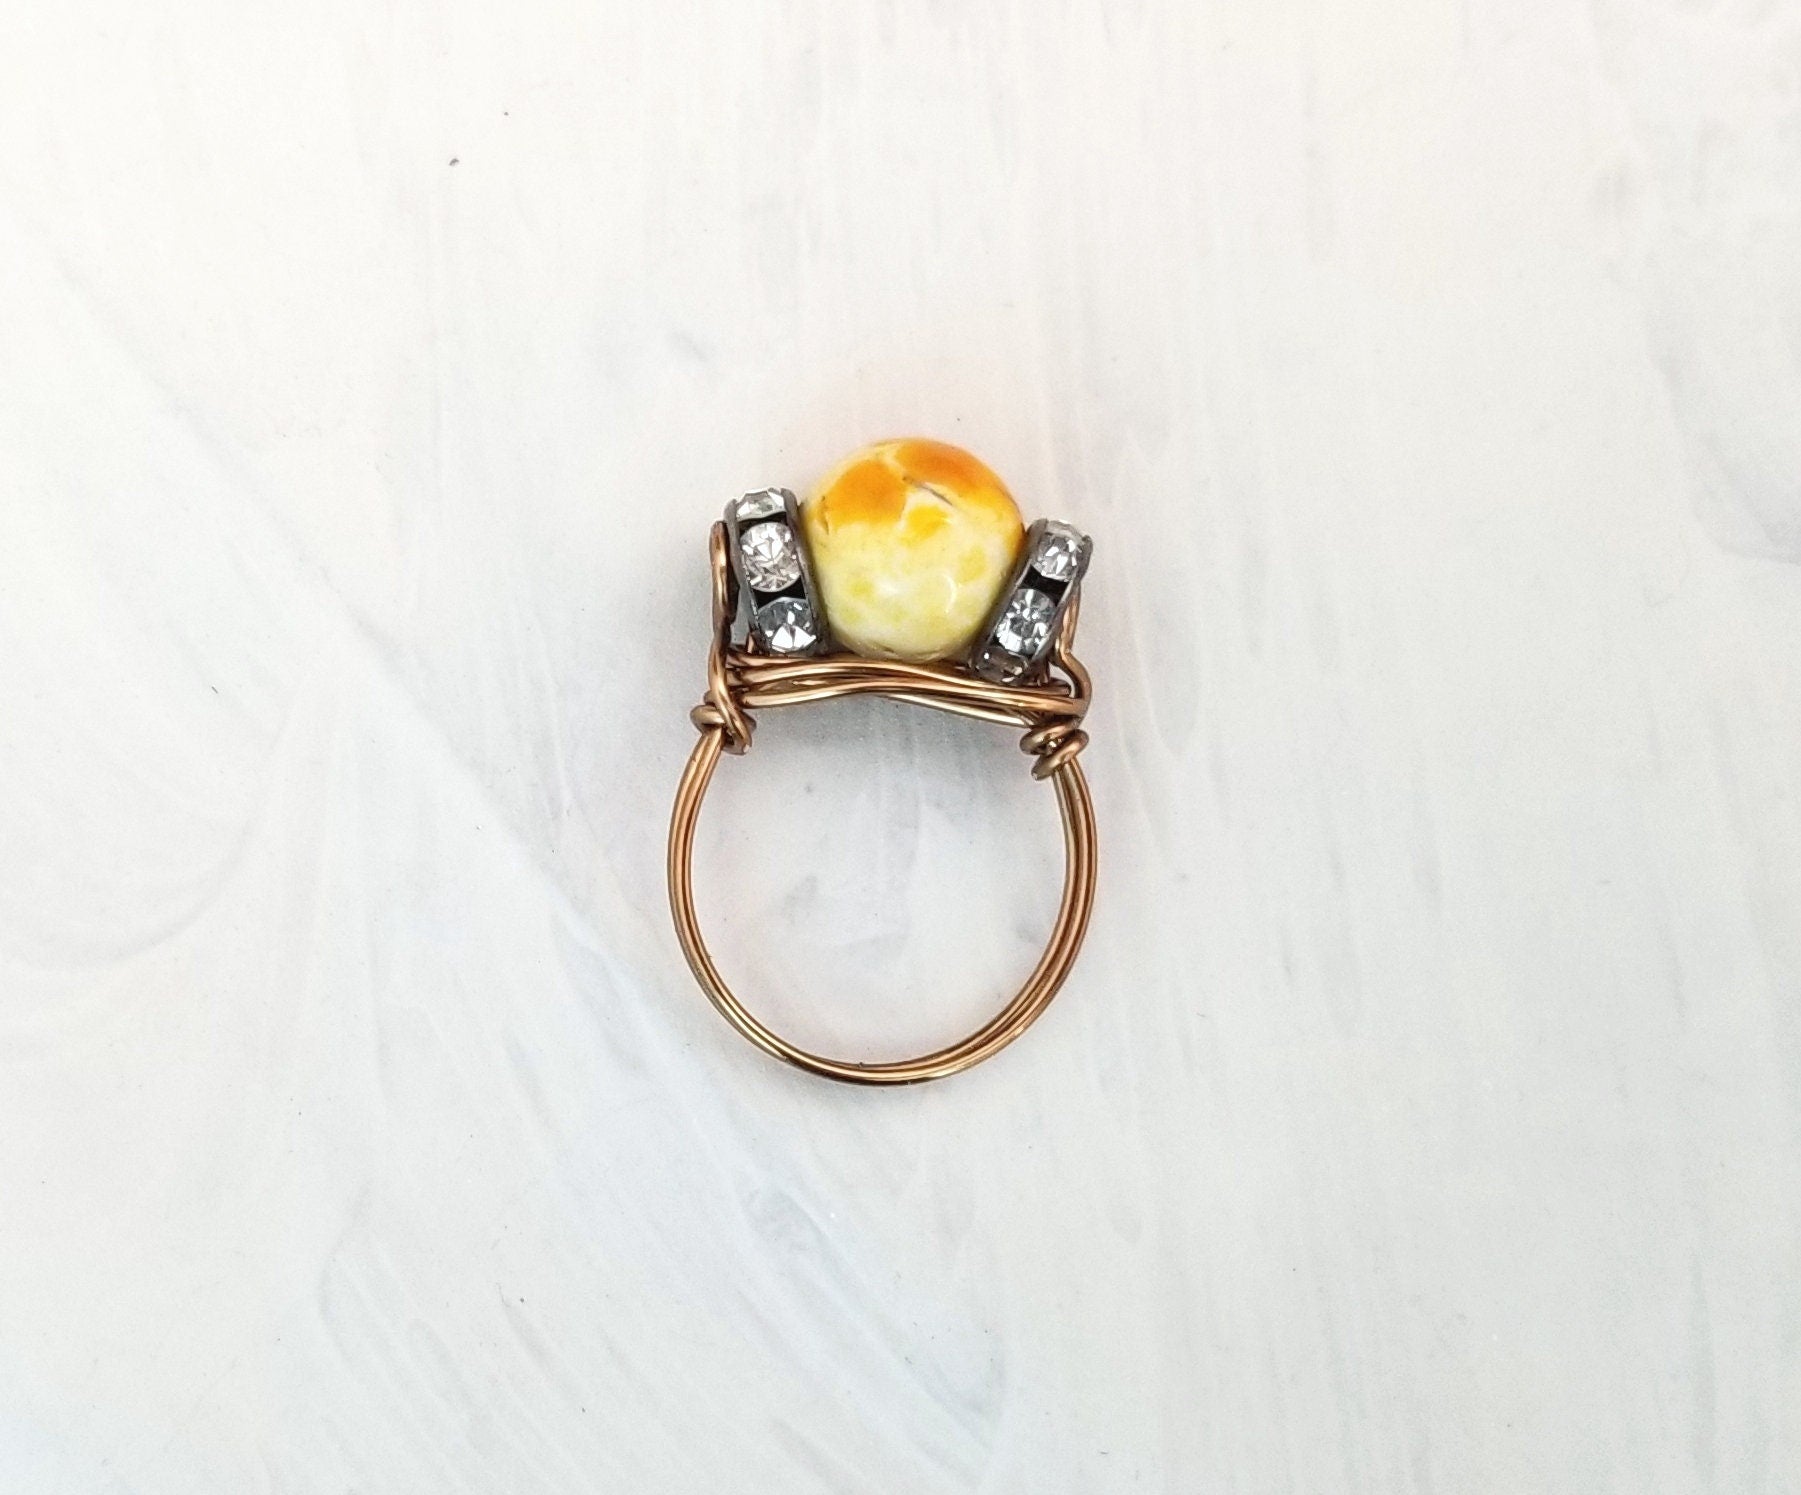 Wire Ring in Yellow Agate with Rhinestones, Fairy Tale, Renaissance, Medieval, Choice of Colors and Metals